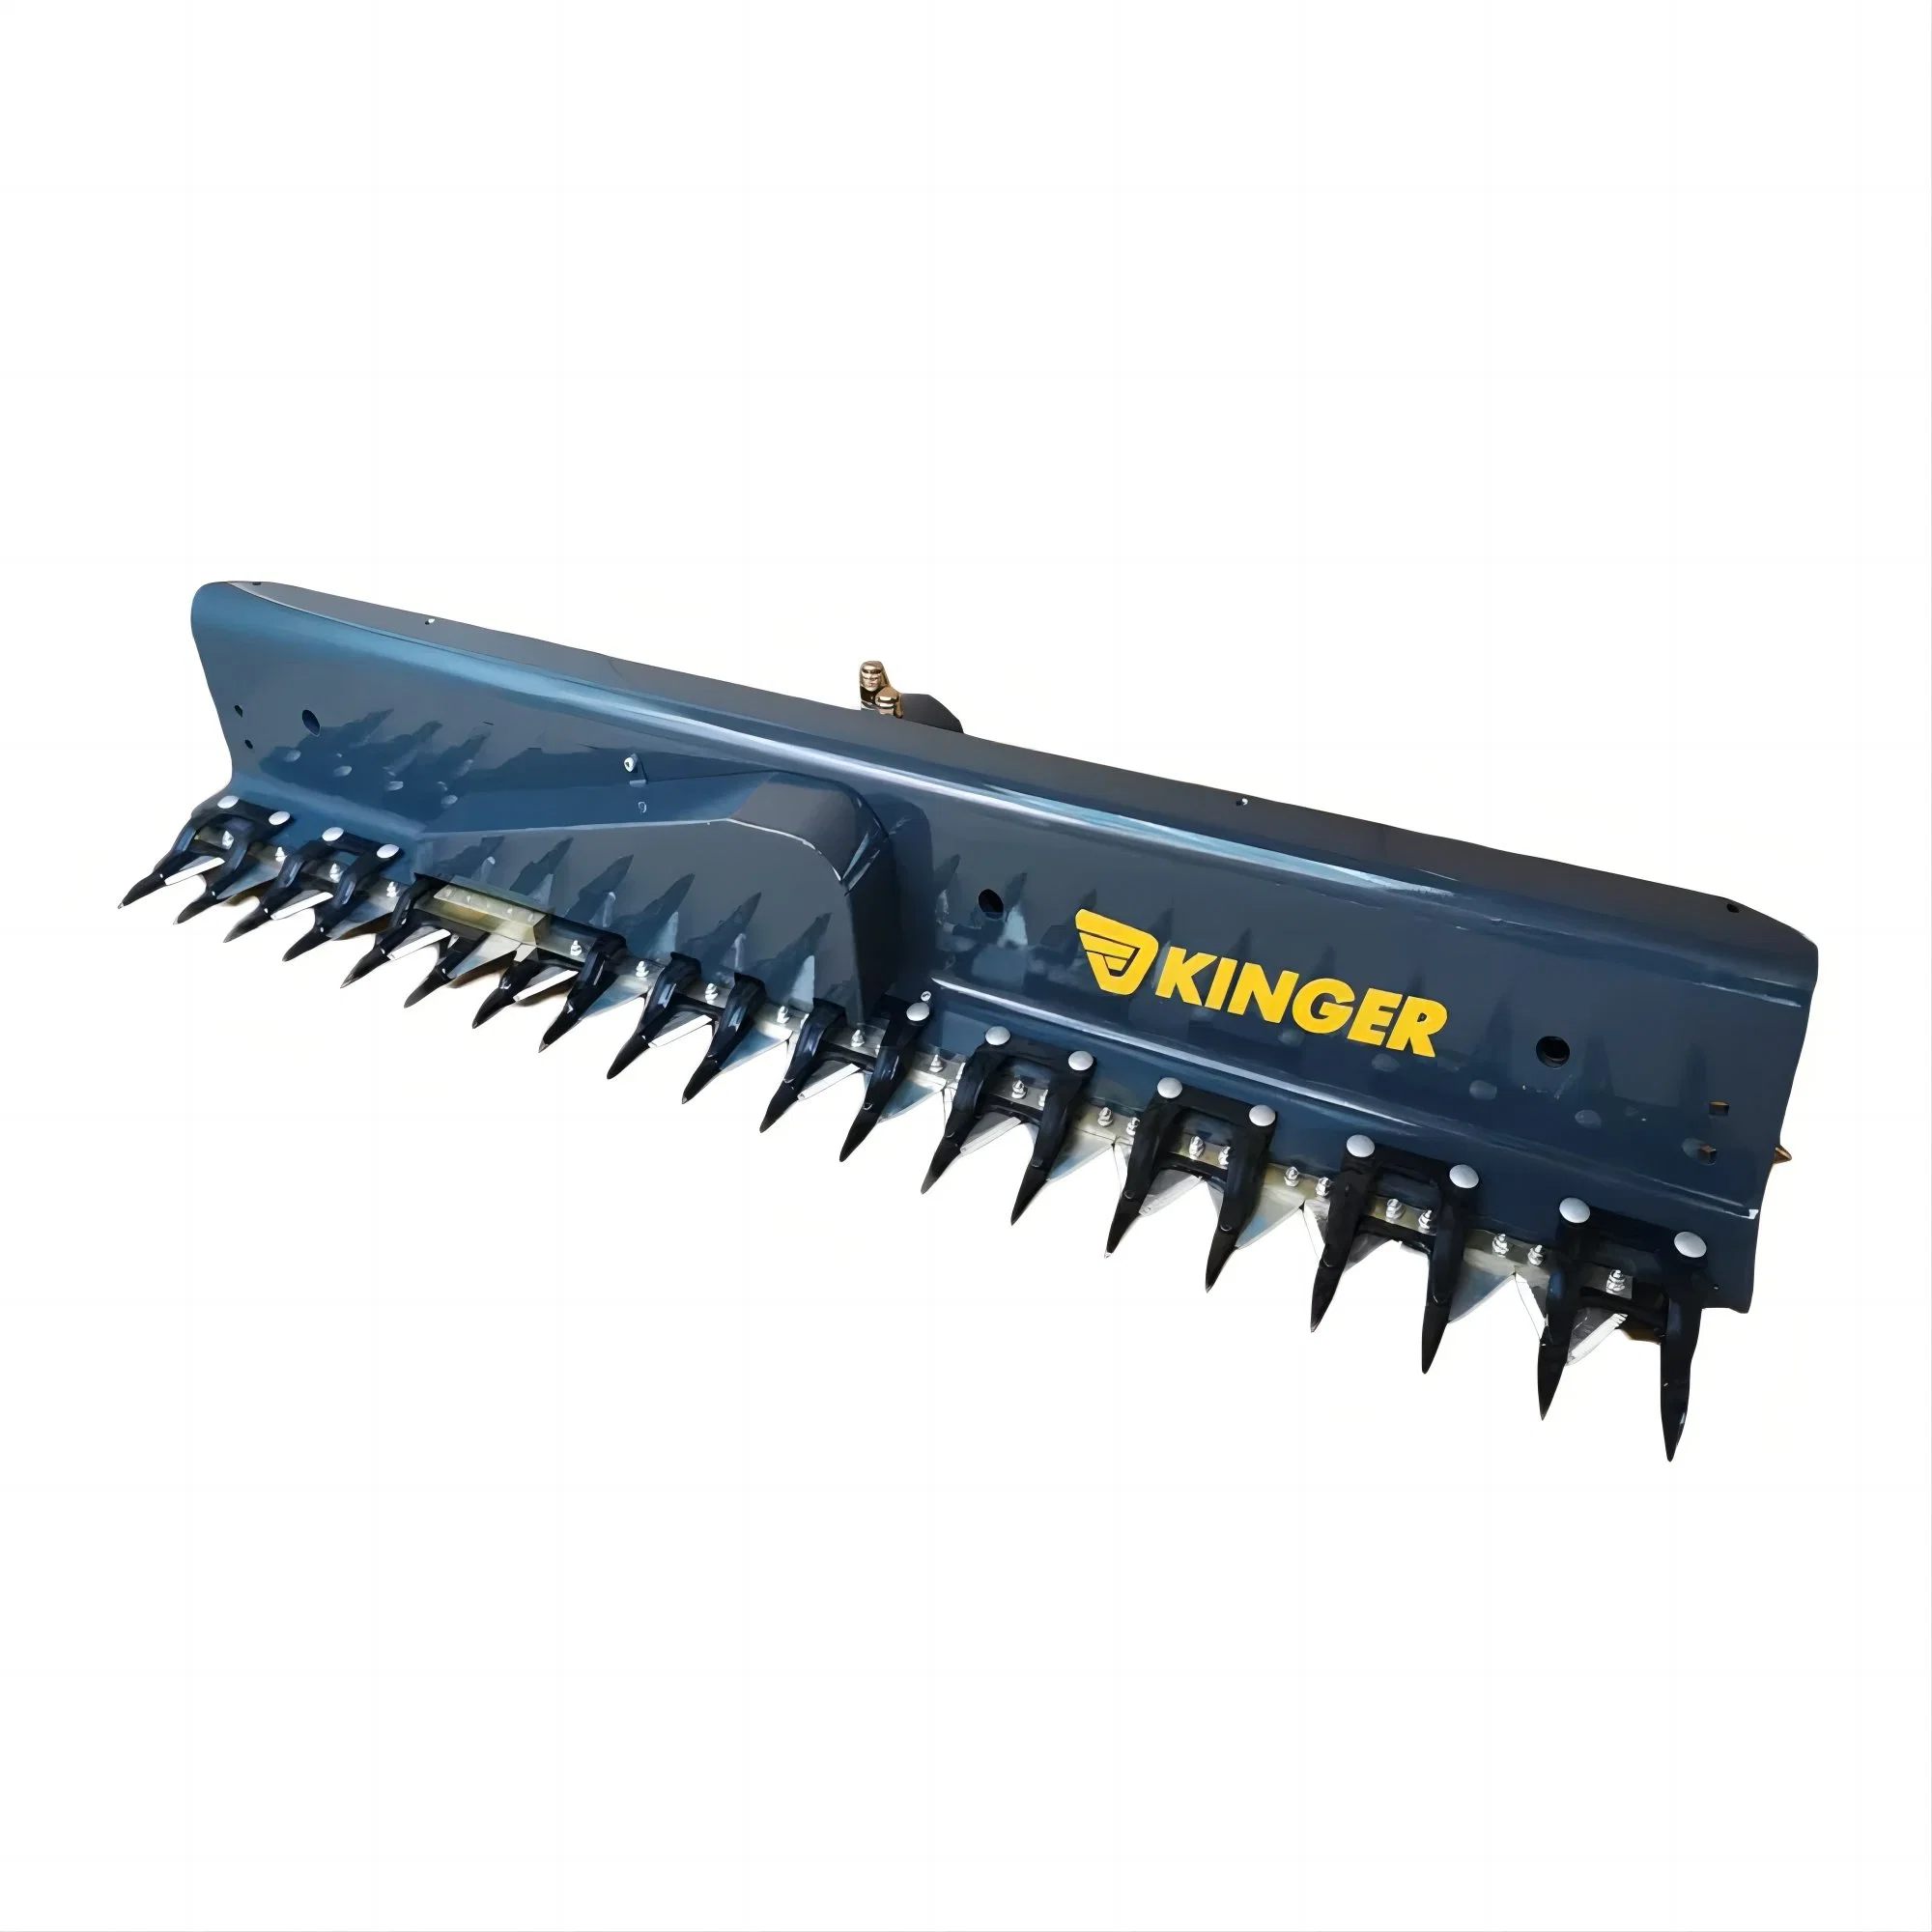 Kinger Excavator Hedge Cutter Greeb Brush Trimmer with Sharp Double Cutting Blade for Sale China Supplier Factory Outlet